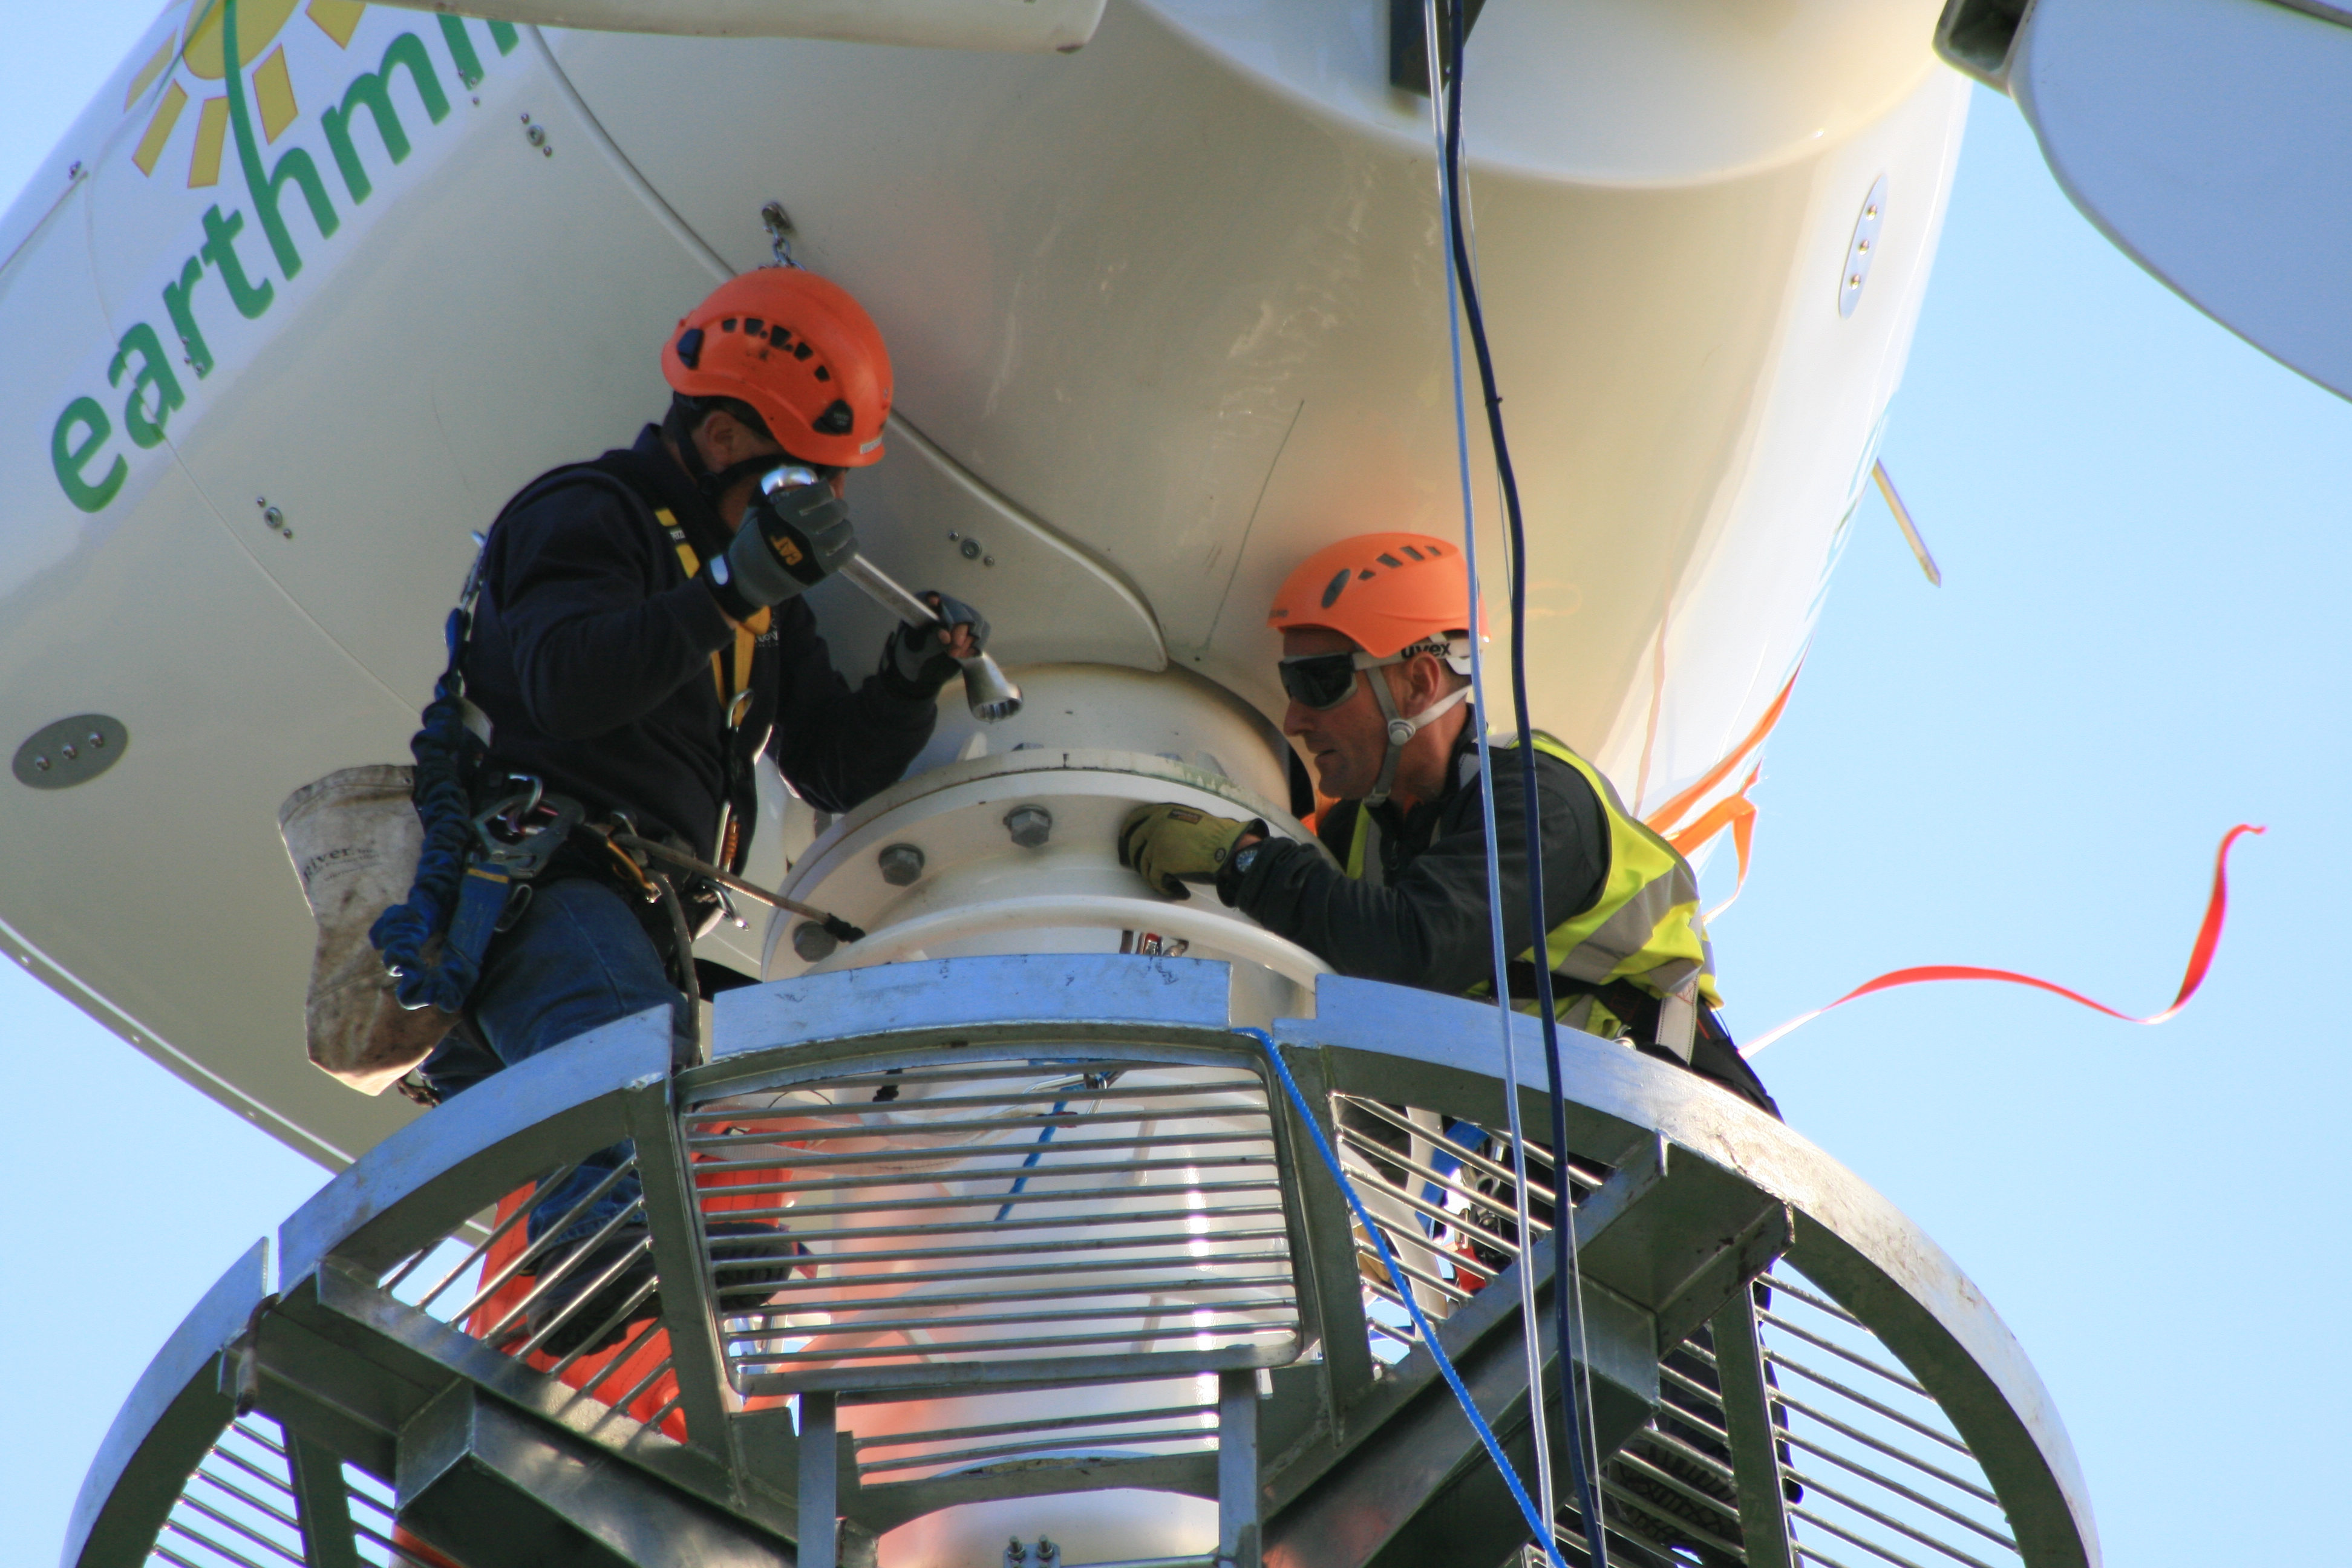 Earthmill engineerings carrying out routine wind turbine maintenance